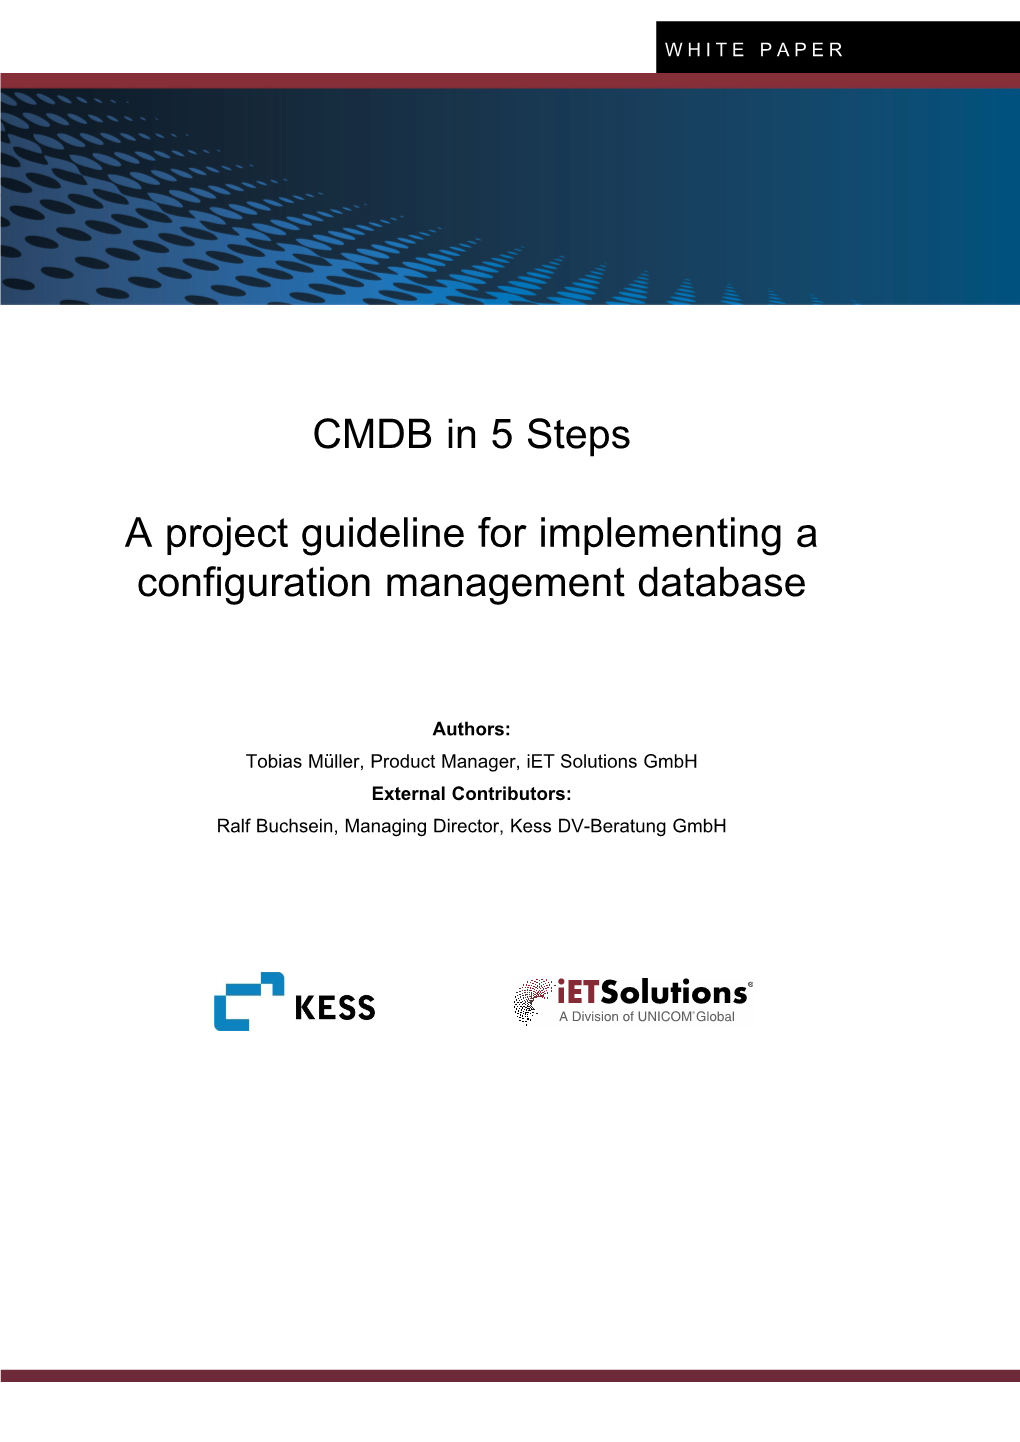 CMDB in 5 Steps a Project Guideline for Implementing a Configuration